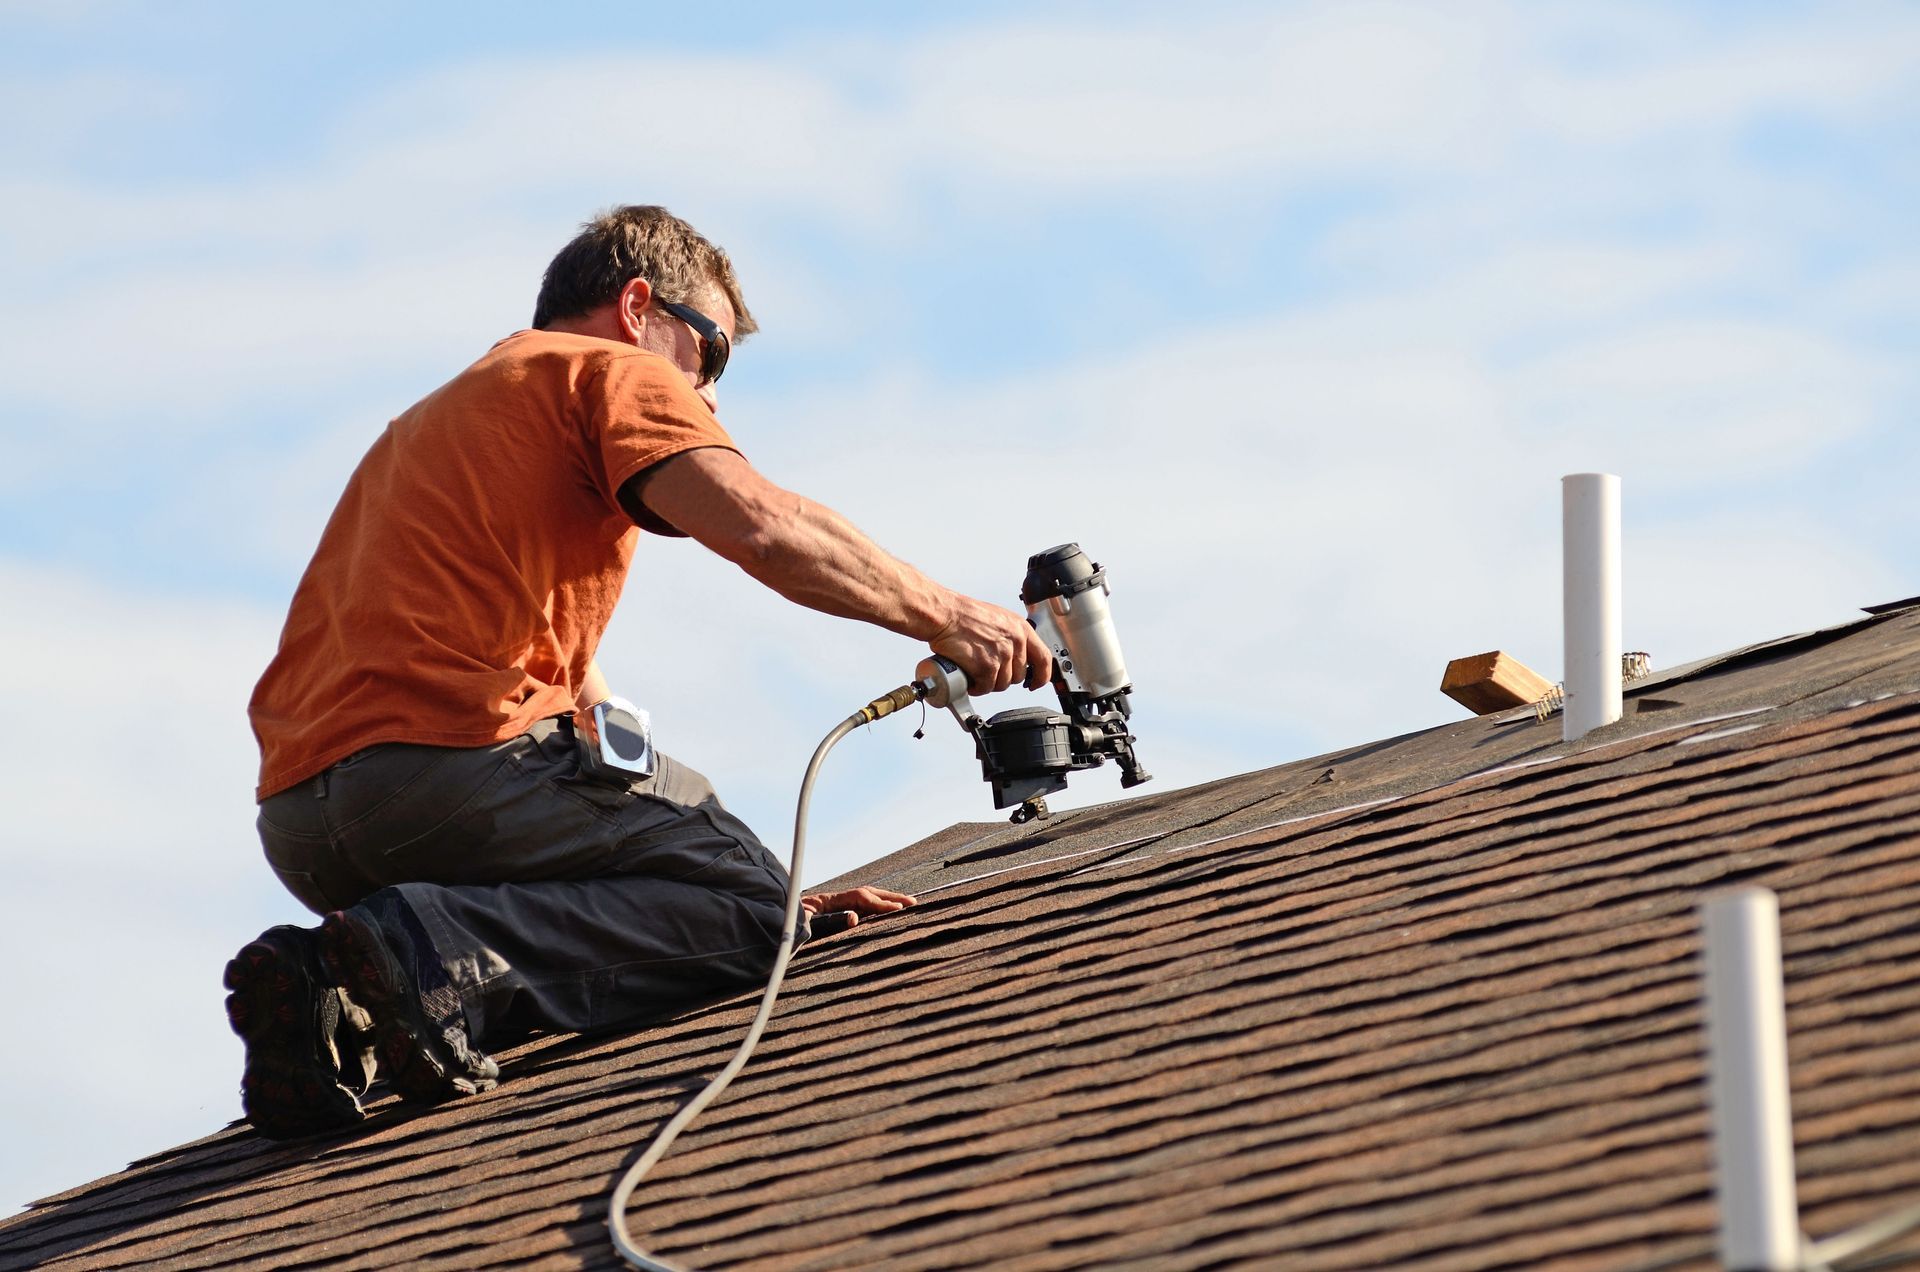 C&d Roofing Suffolk County